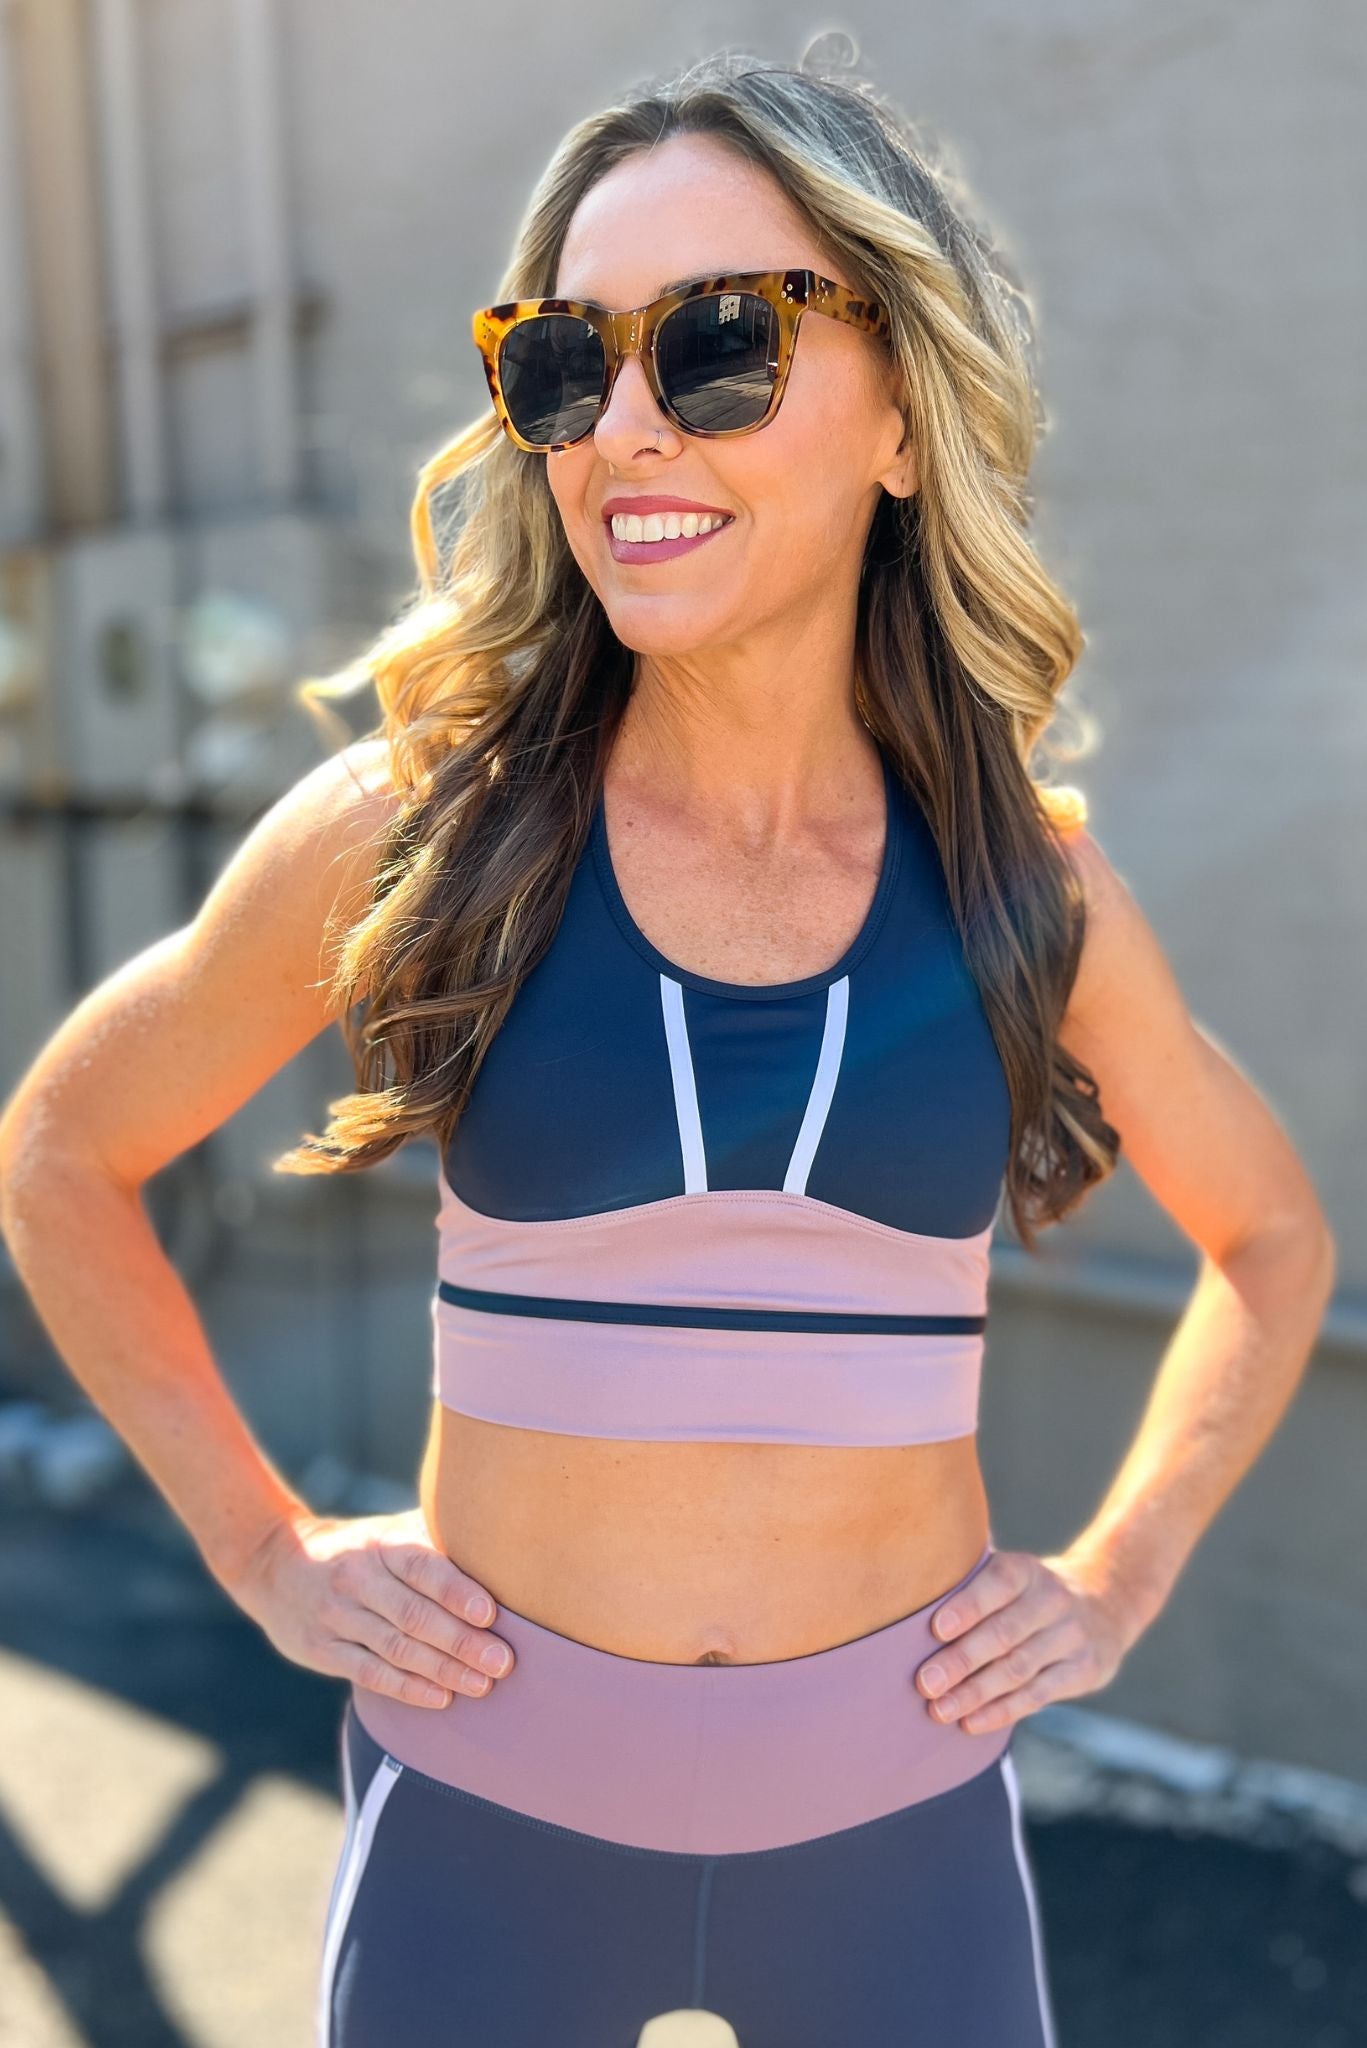 Navy Sports Bra With Mauve Contrast and White Racing Stripes SSYS The Label, athleisure, everyday wear, mom style, layered look, must have, shop style your senses by mallory fitzsimmons